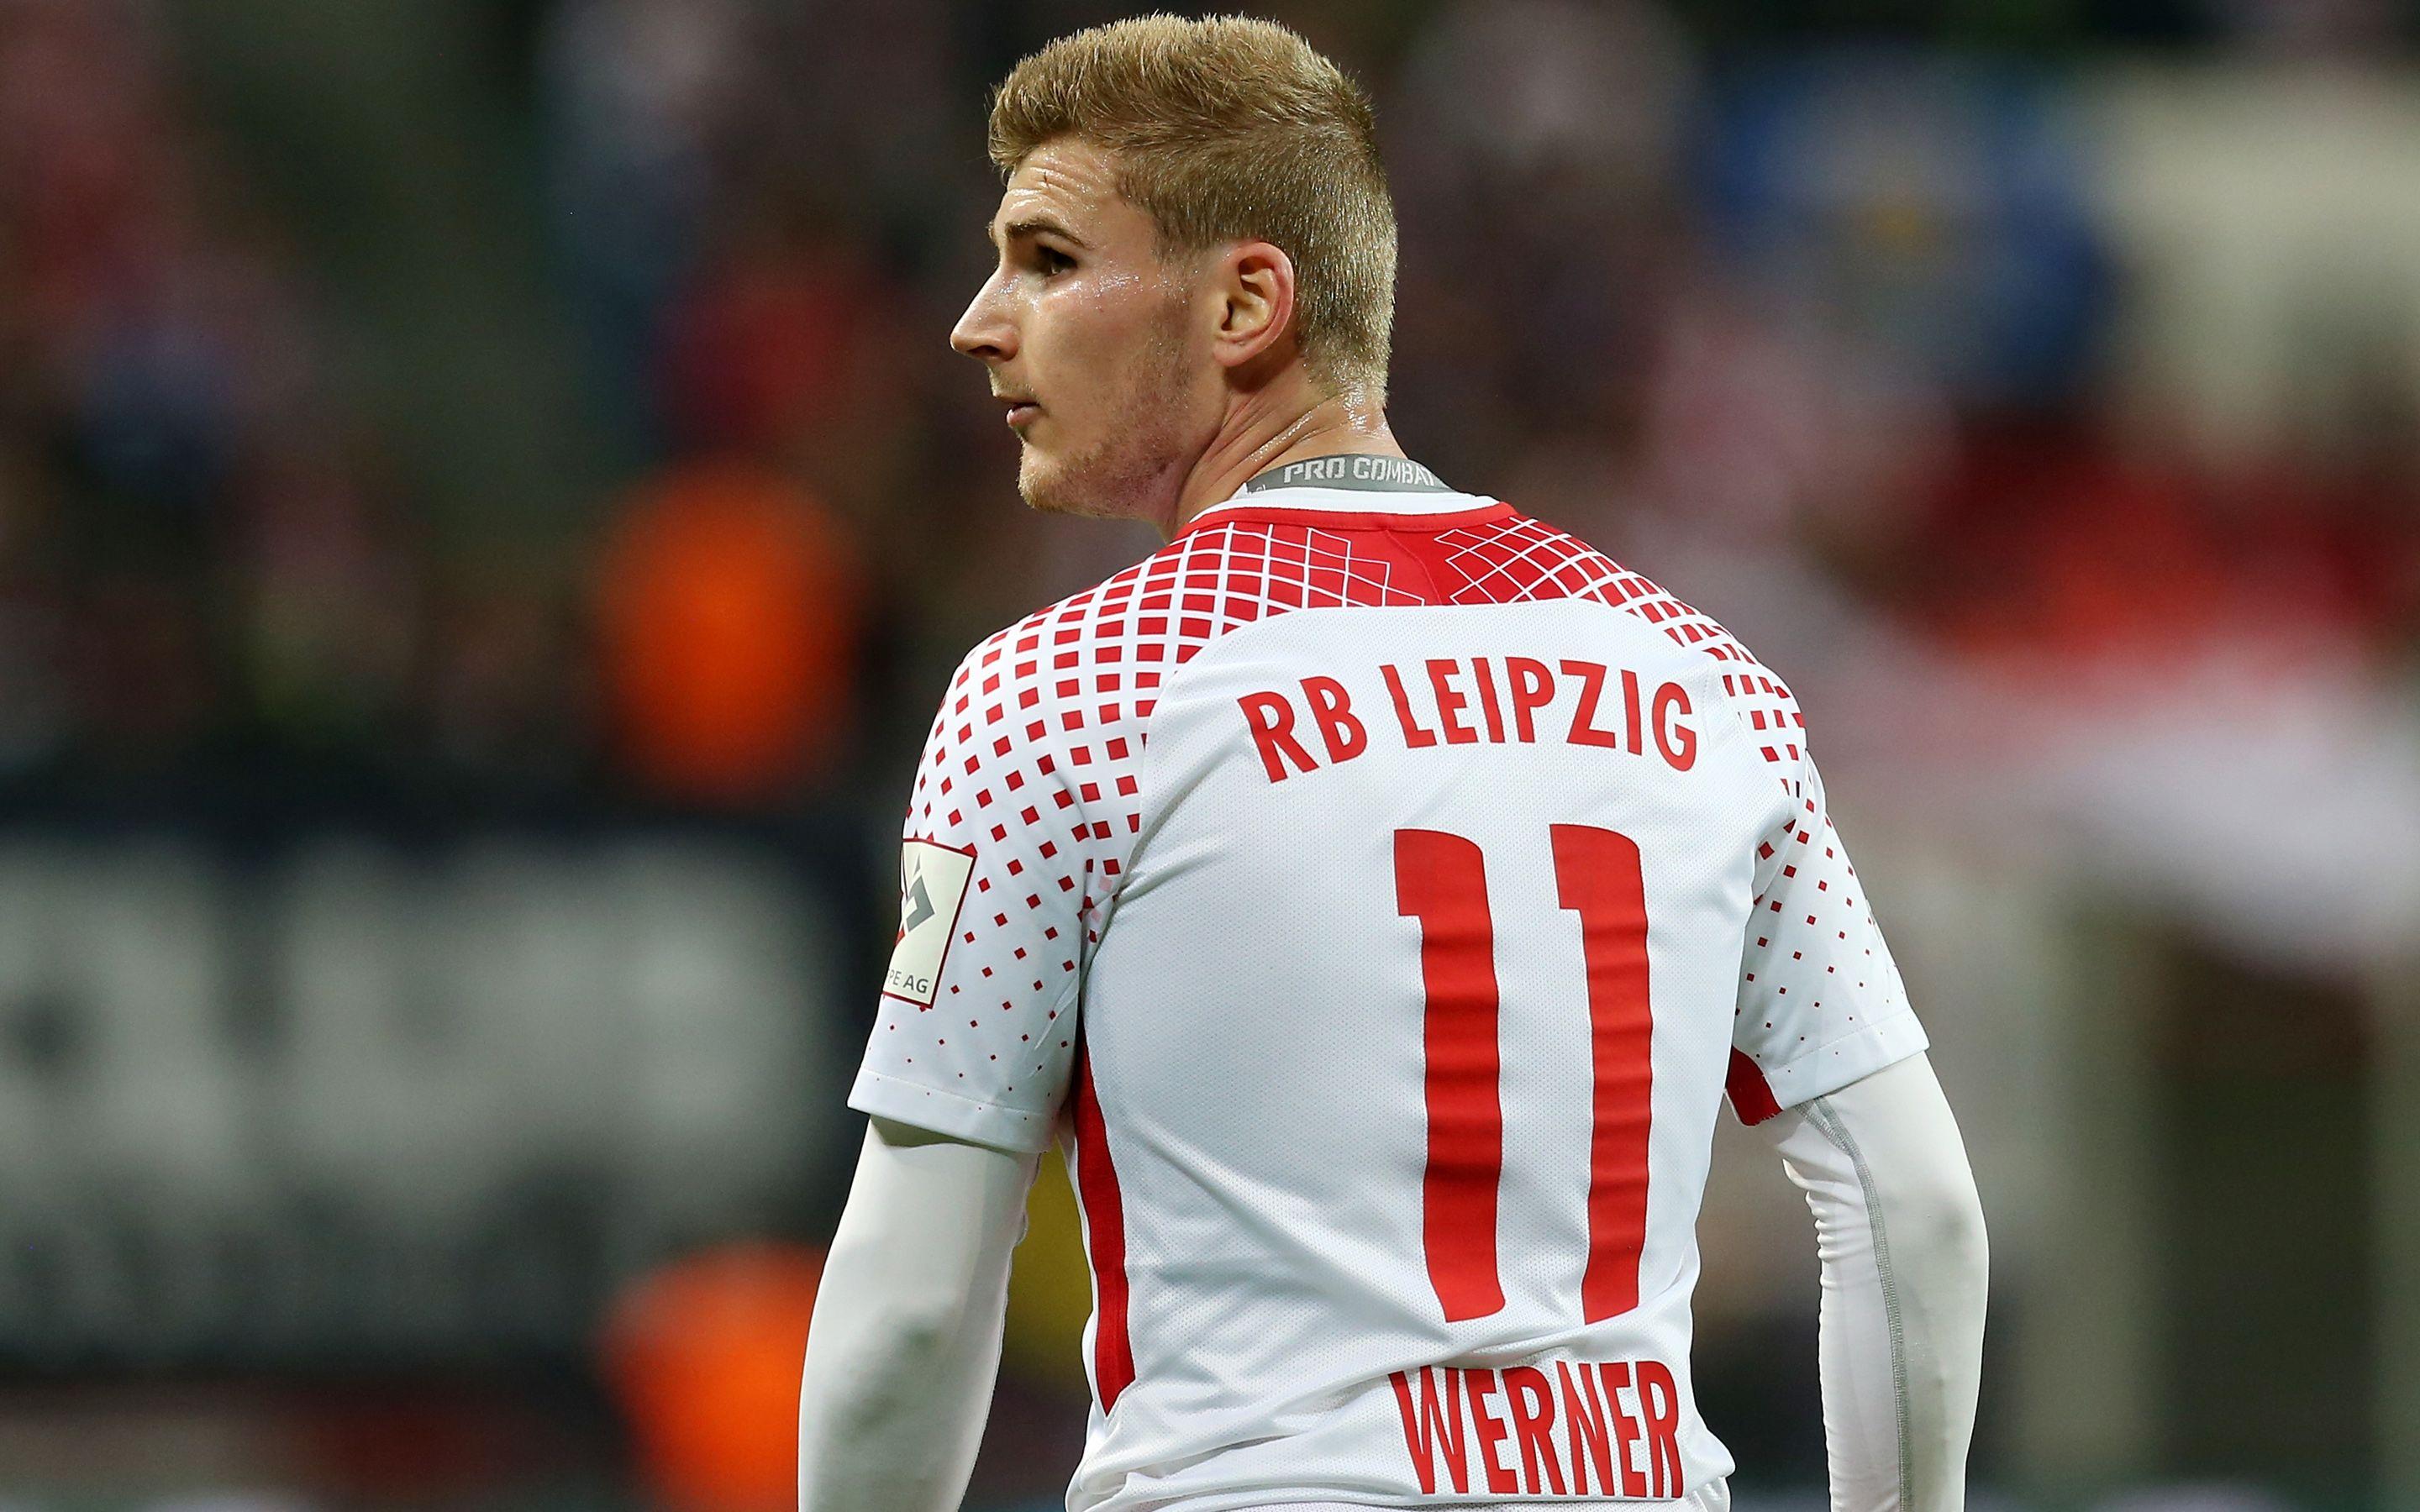 Download wallpaper Timo Werner, RB Leipzig, German football player